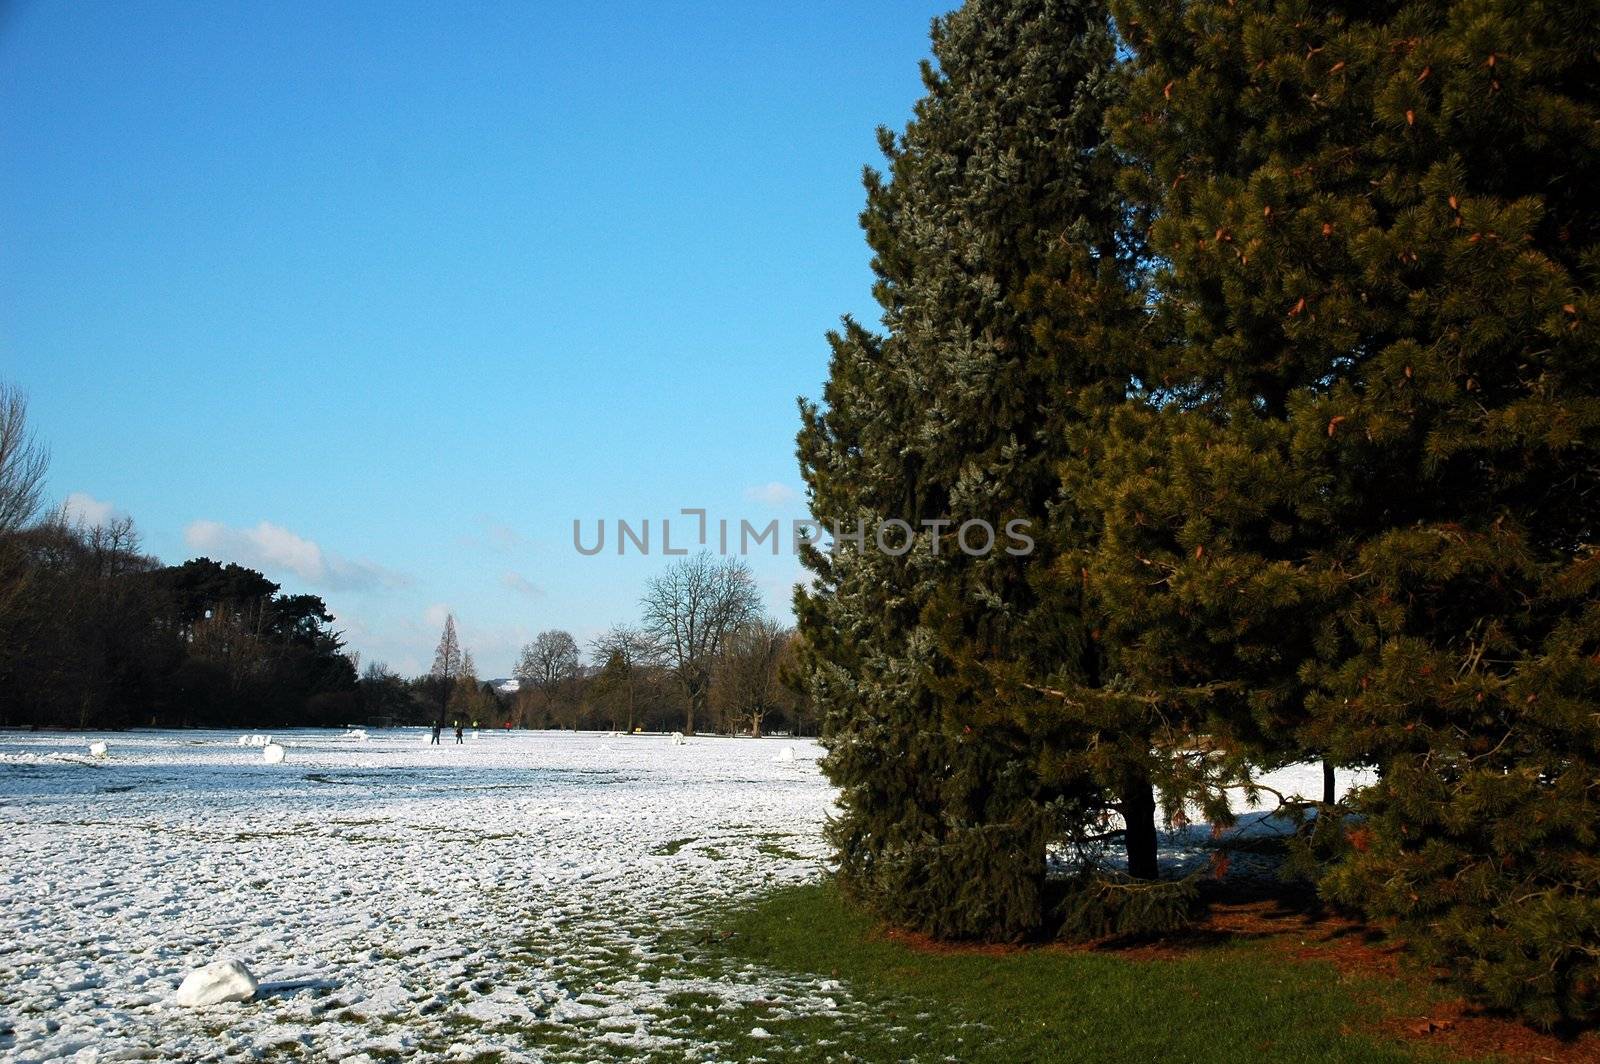 snowy cardiff park with tree and blue ski, horizontally framed picture